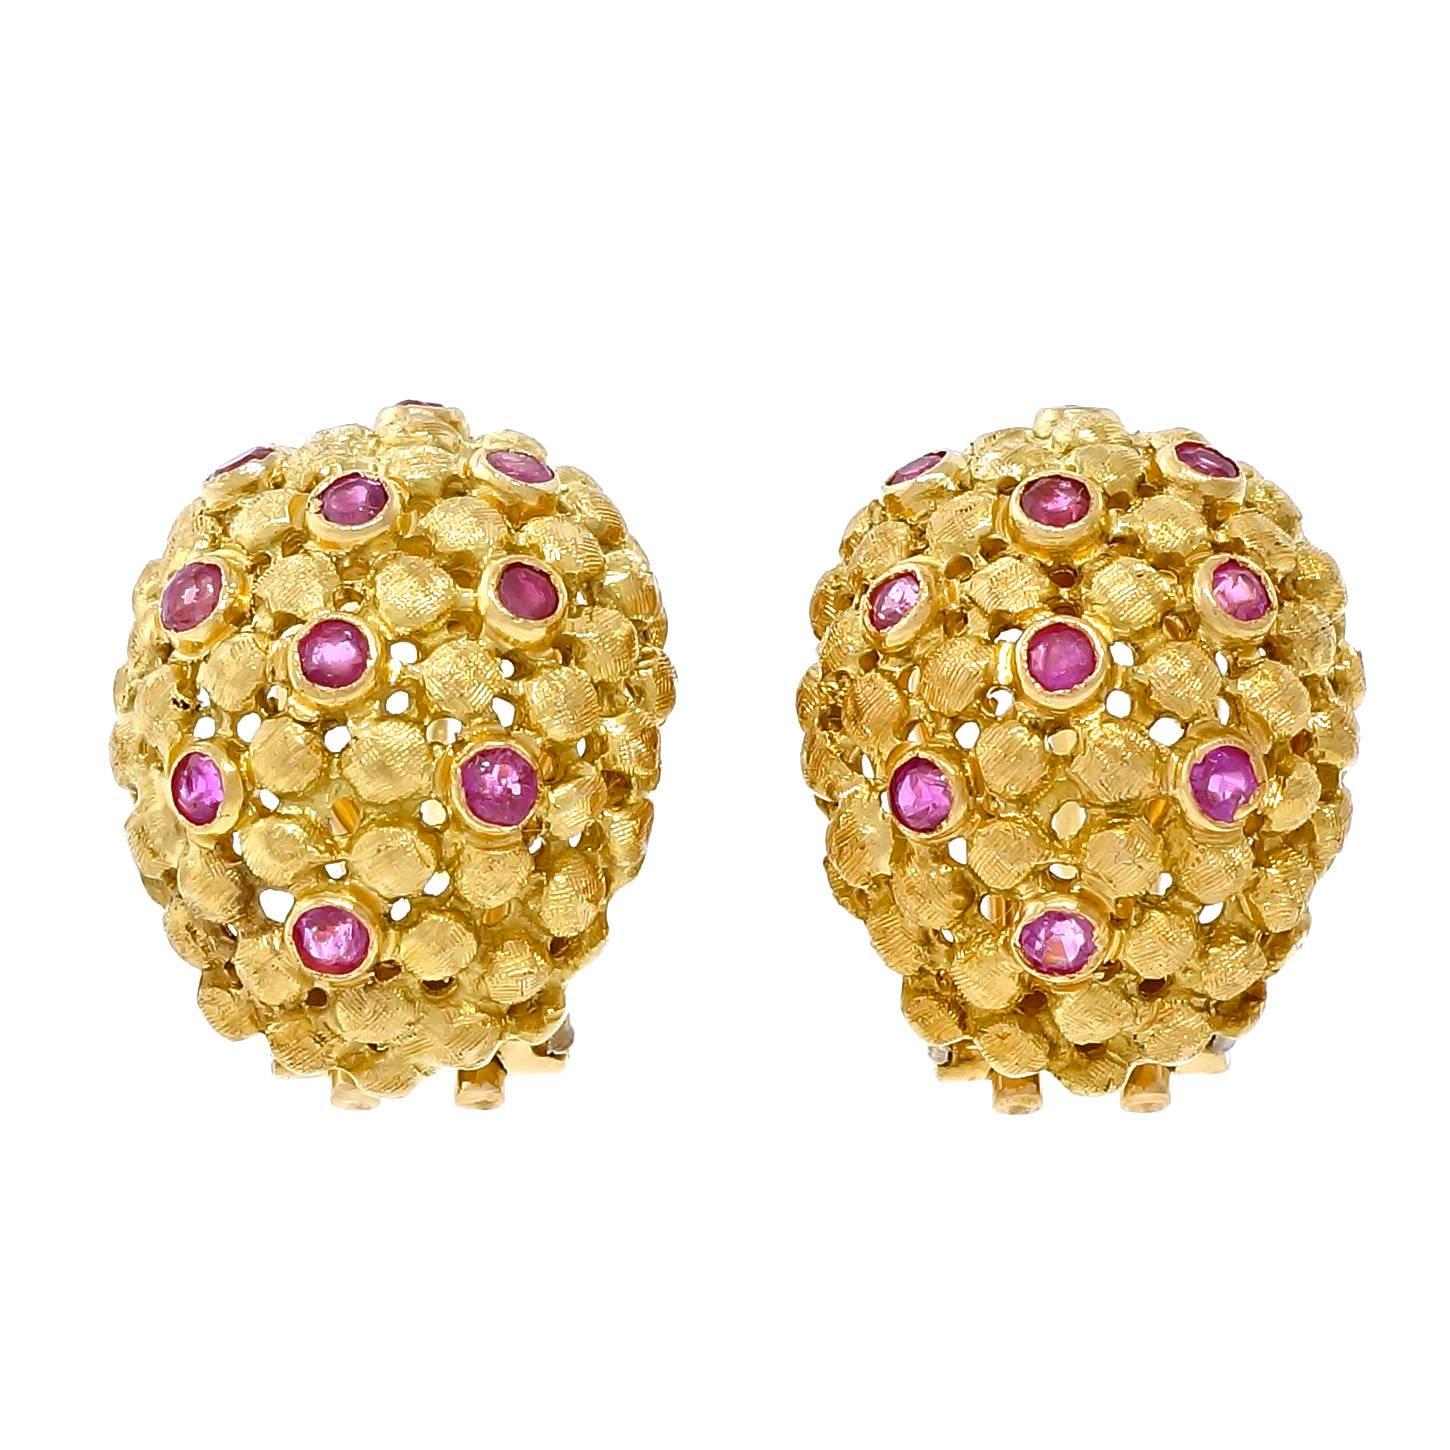 Spitzer & Furman Ruby Gold Domed Clip Post Earrings For Sale